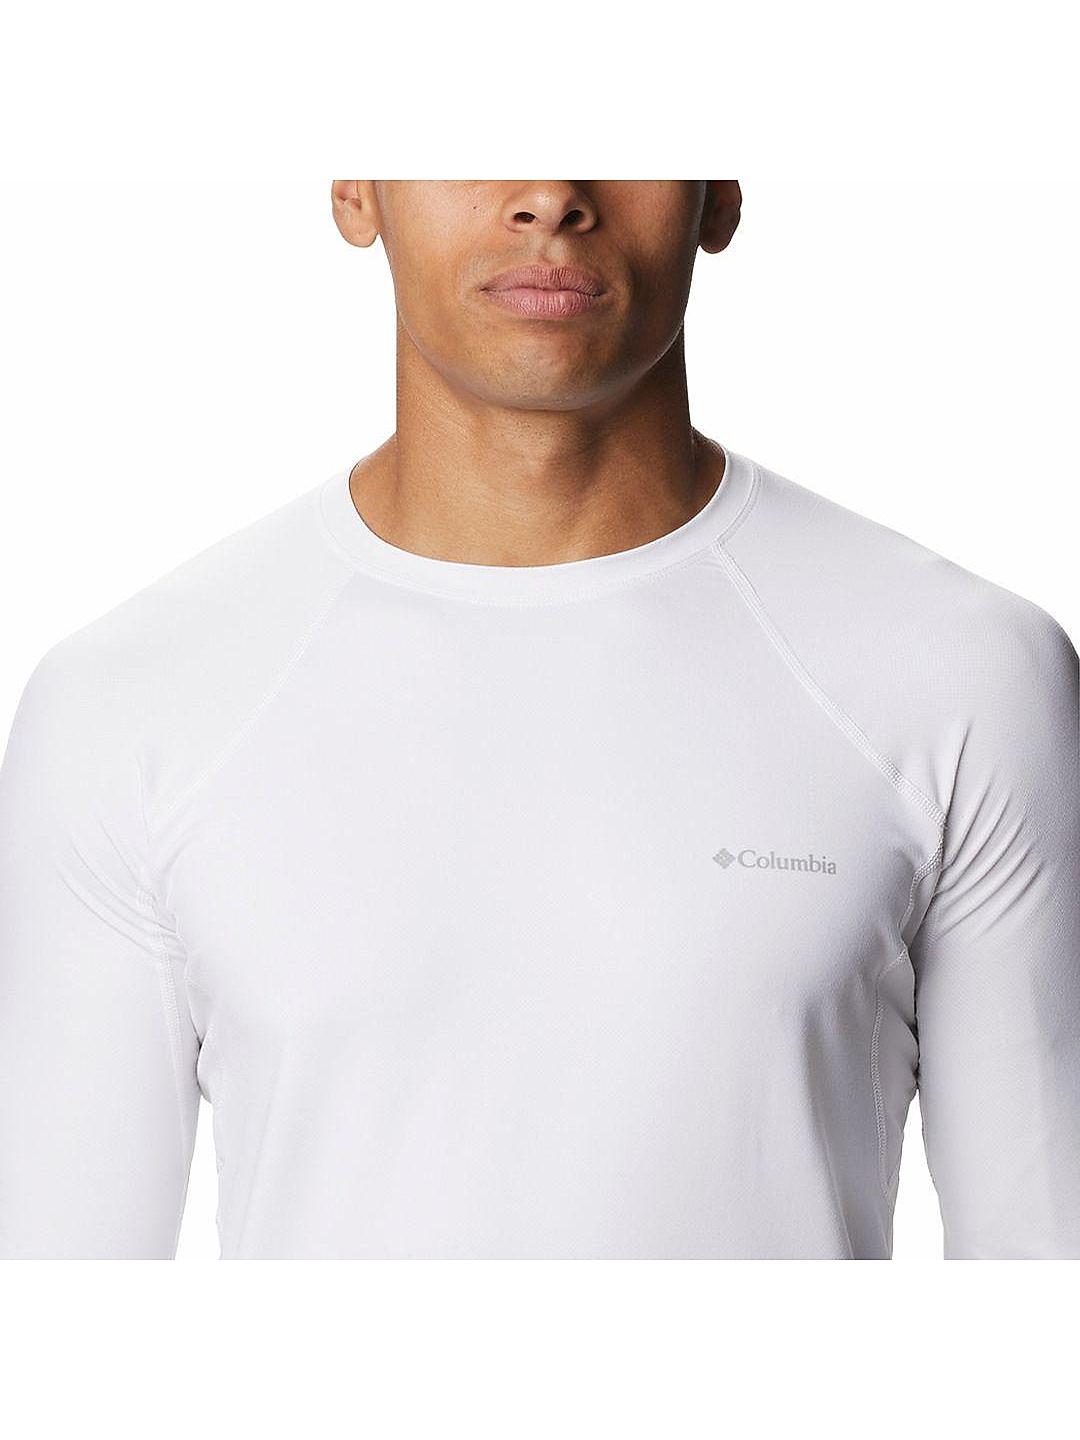 Buy Midweight Stretch Long Sleeve Top for Men and Women Online at Columbia